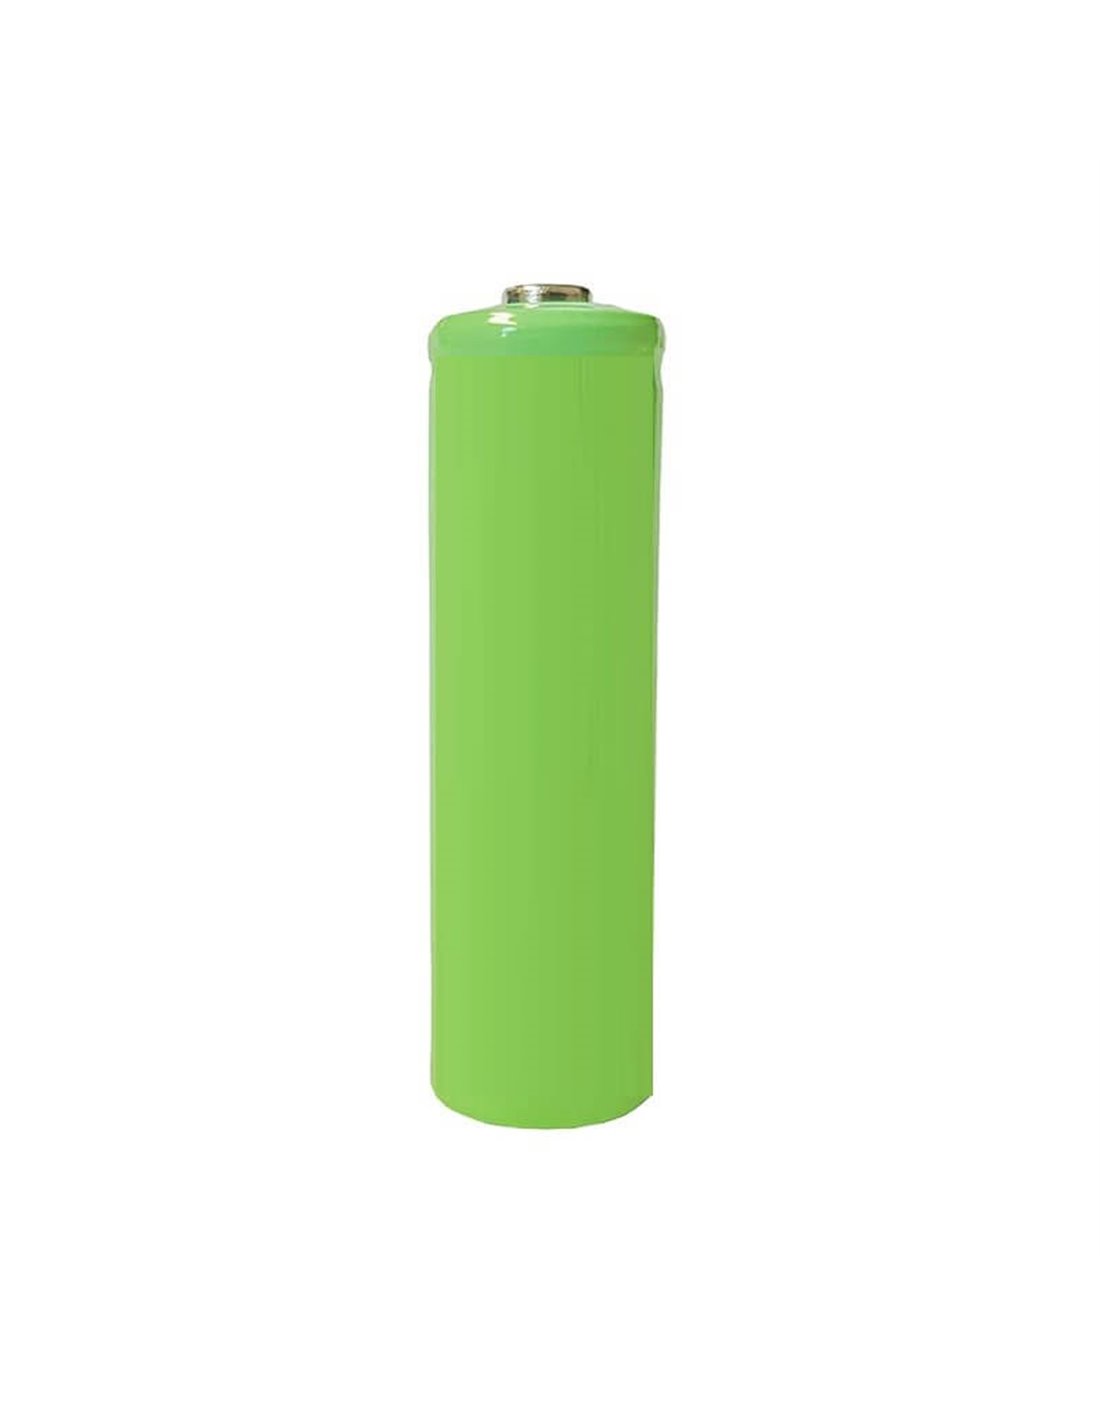 2000Mah Generic AA Rechargeable NiMh battery button top